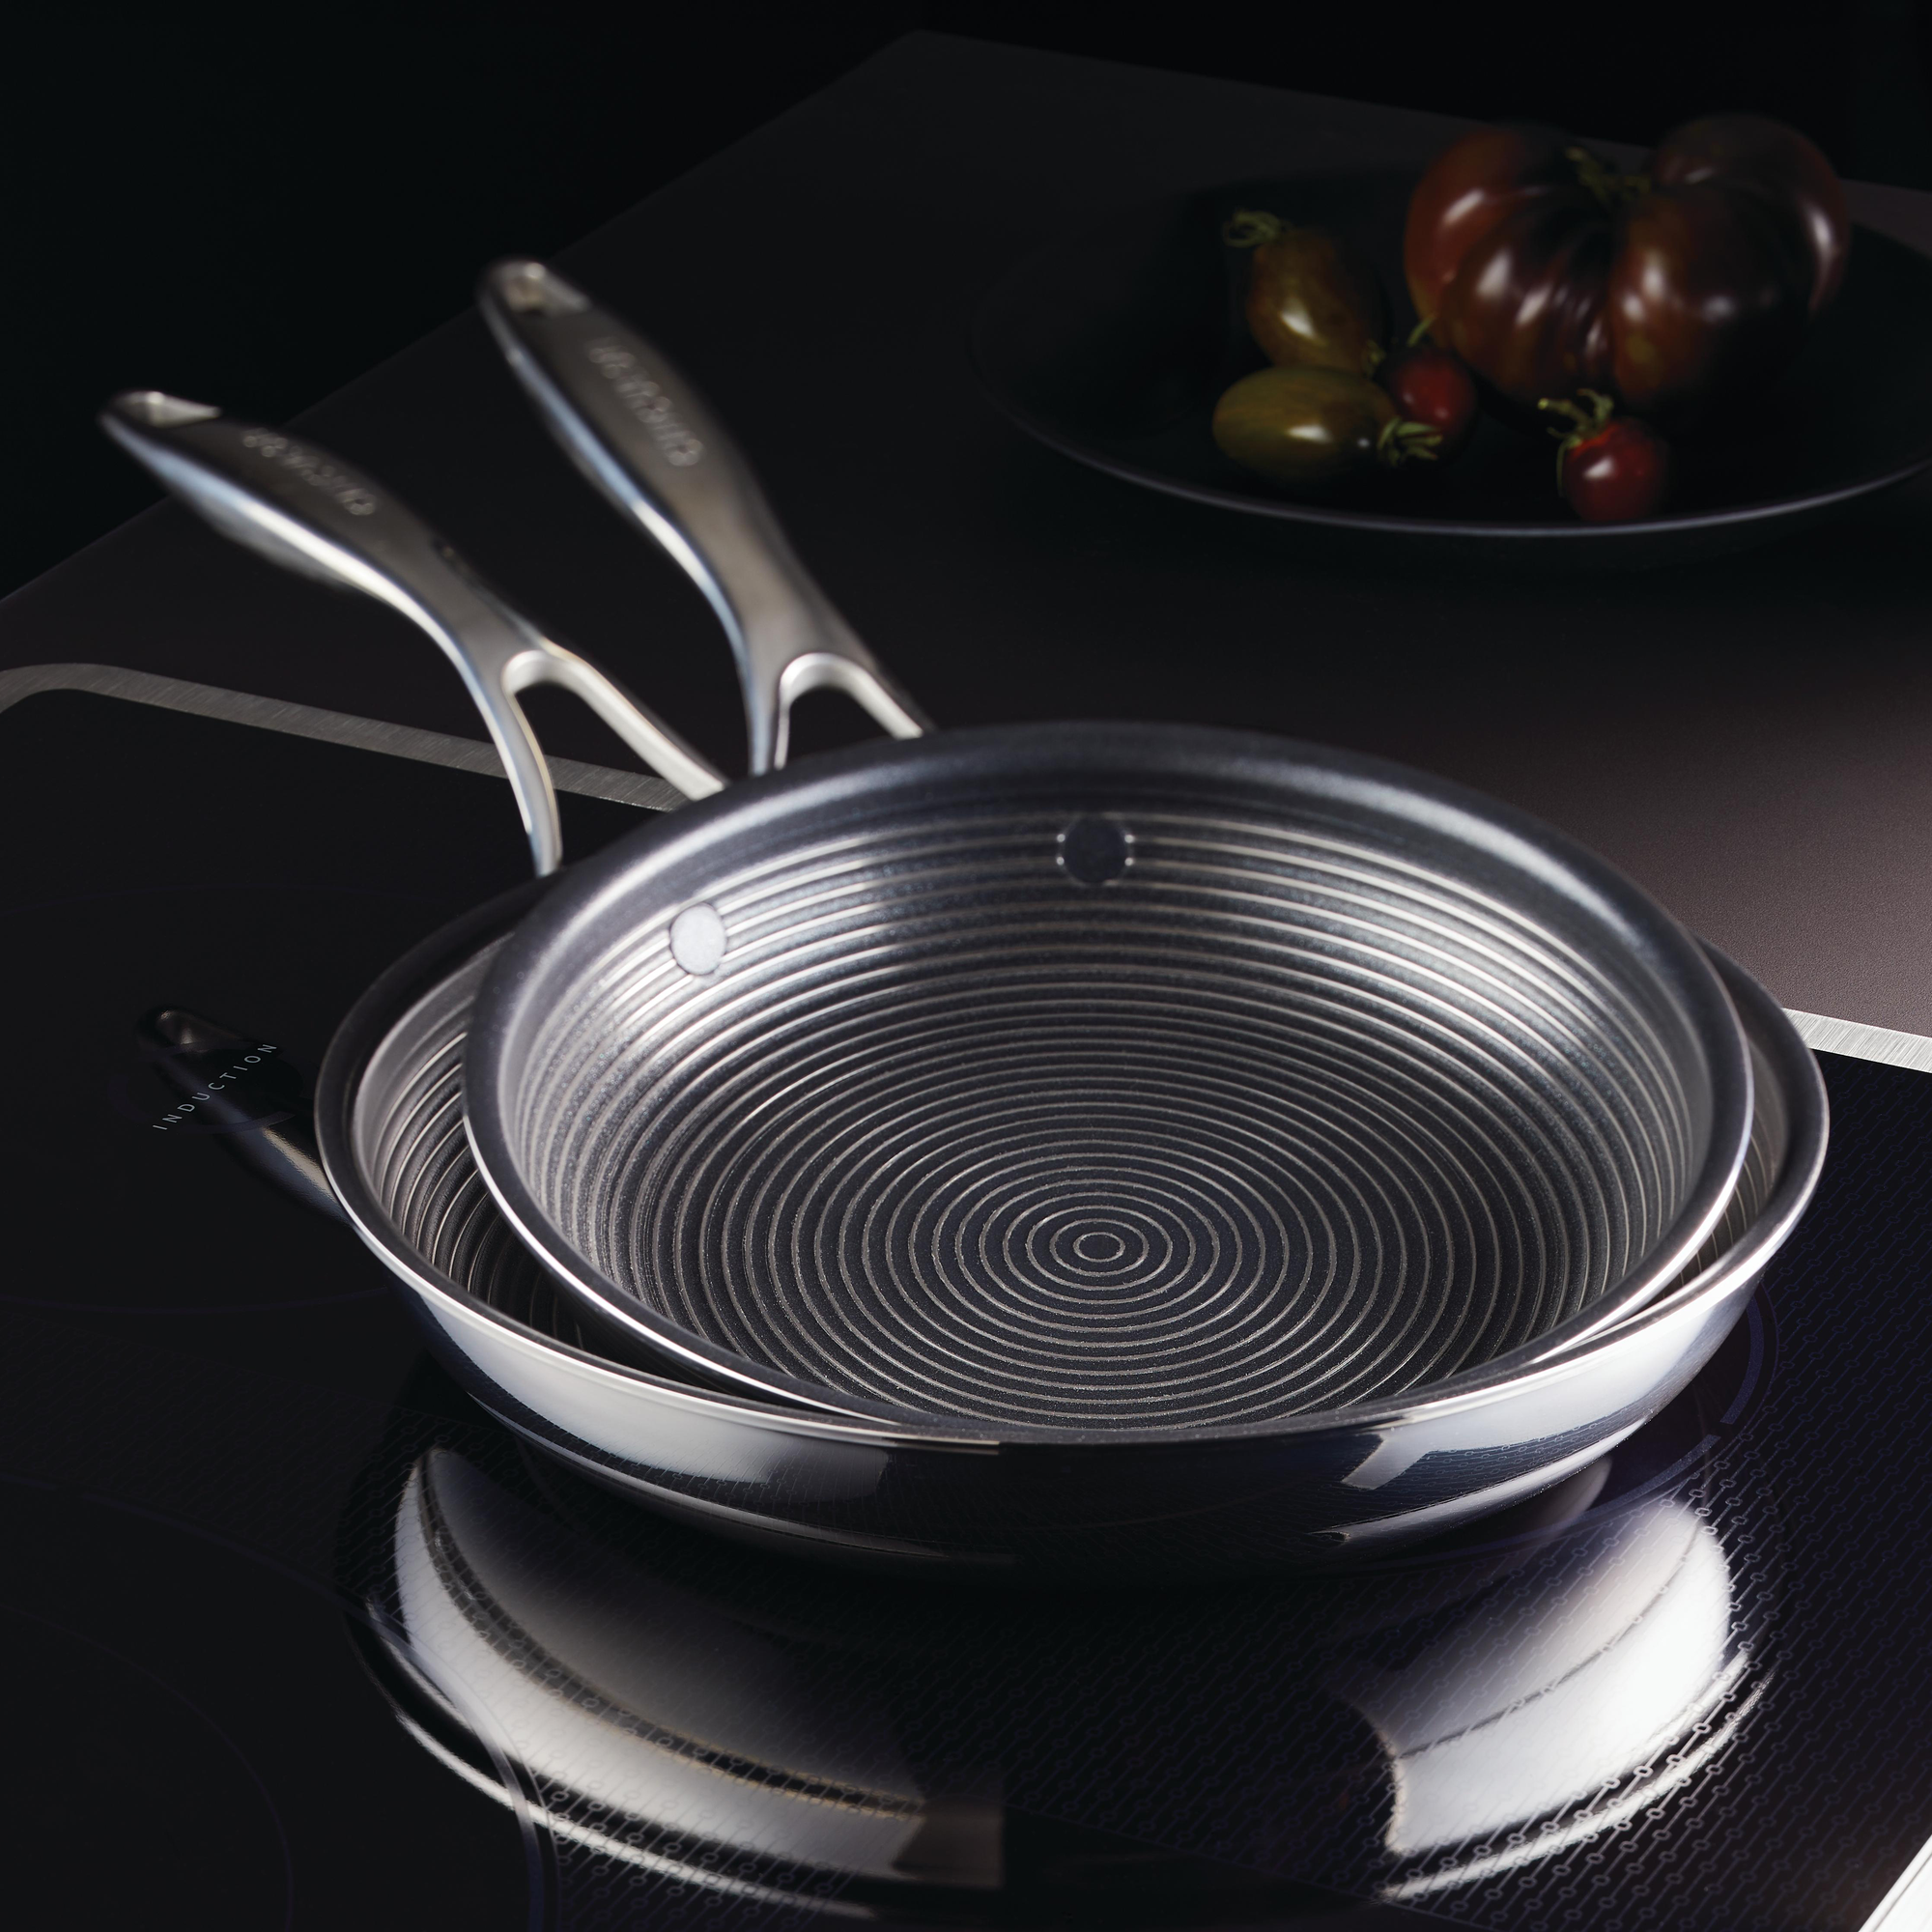 8.5 Inch Stainless Steel Fry Pan